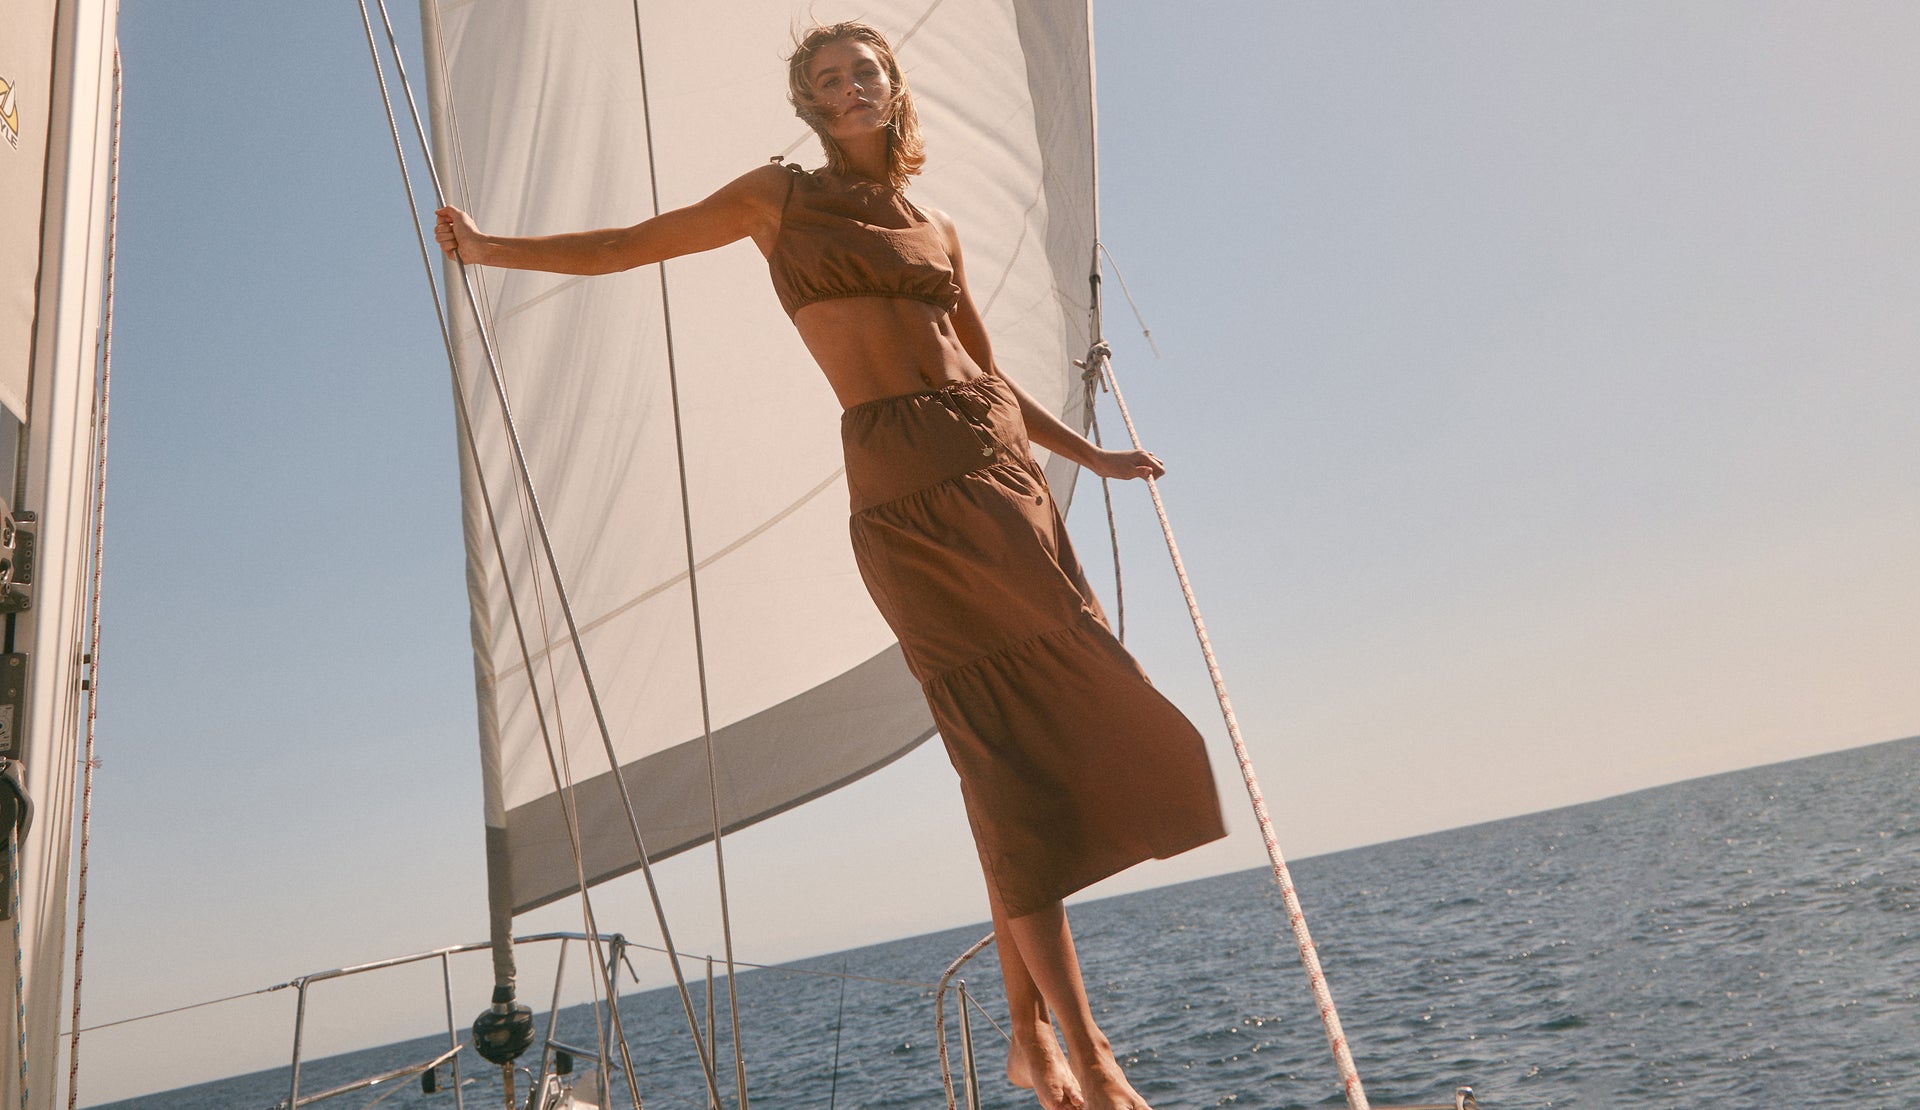 Editorial image of model standing on boat